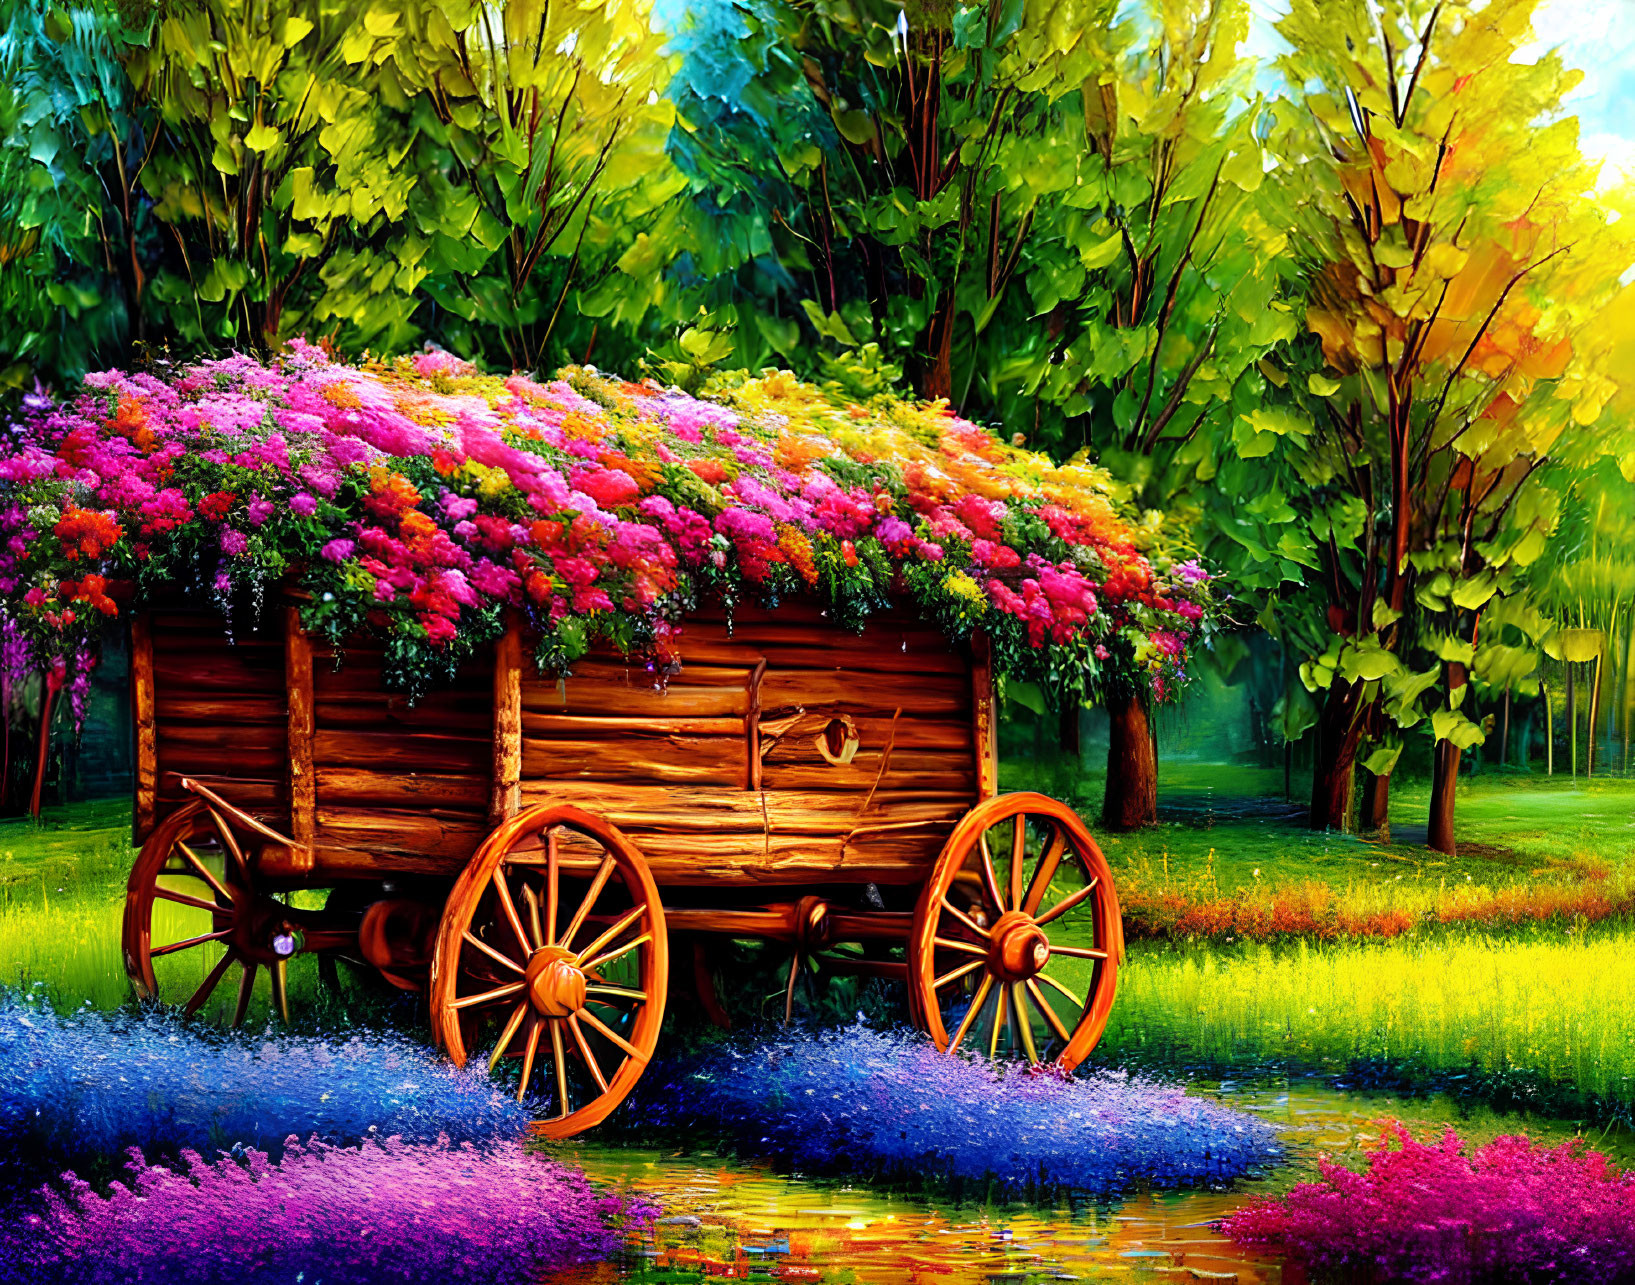 Colorful Flower-Filled Cart in Sunlit Forest Clearing